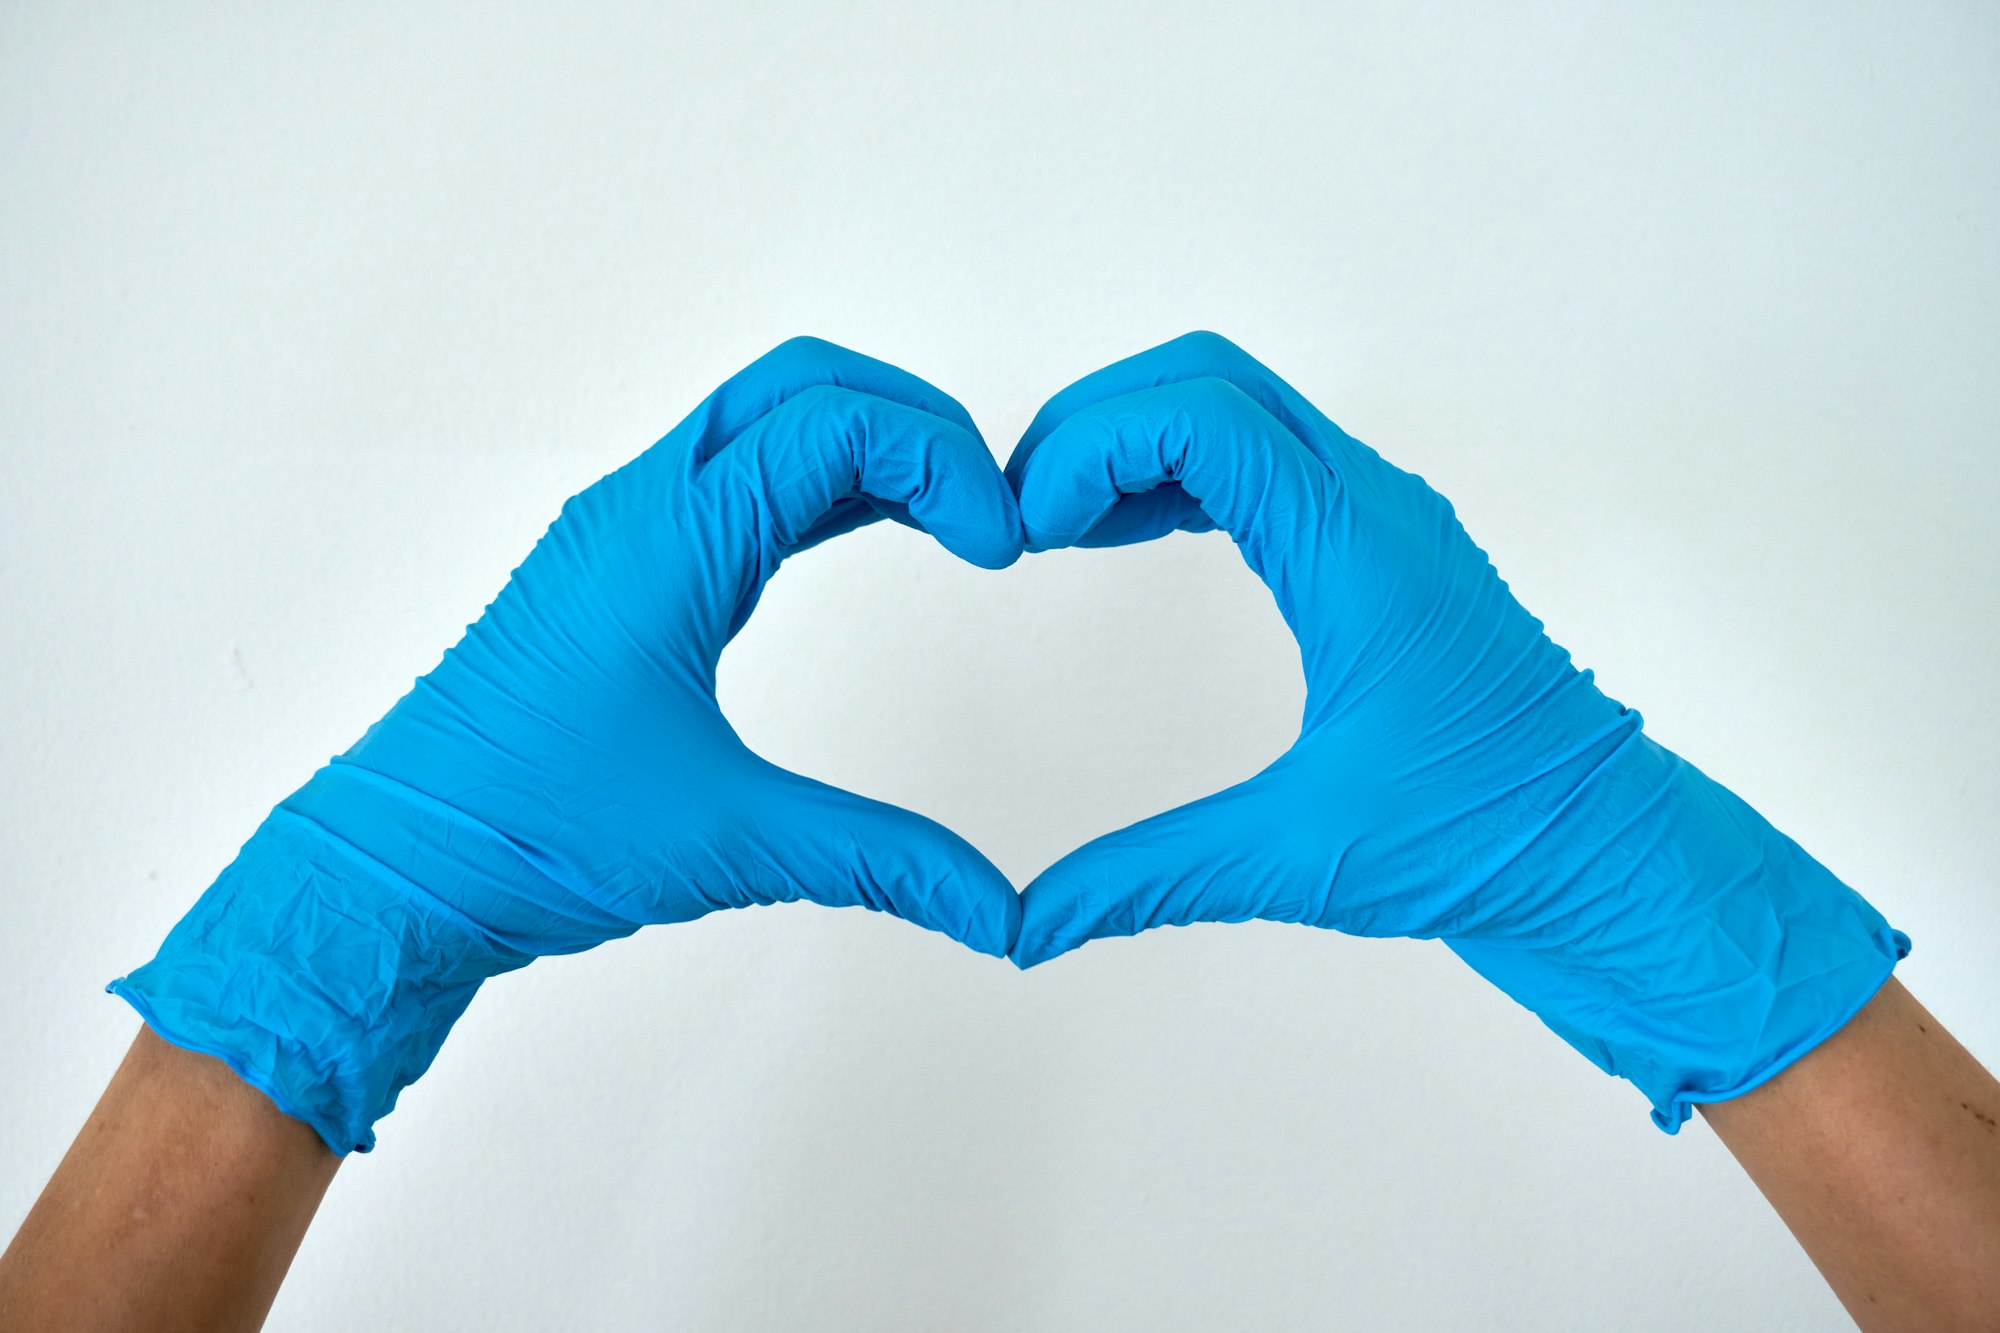 Heart shape hands stay safe! 💙 -- Thanks for visiting! Donations help & motivate me to keep uploading more 📸's. Even a buck or two helps. ➡️ https://www.buymeacoffee.com/uniqueton Found my photos useful? feel free to contact me about anything at email: uniquetonshots@gmail.com IG: @uniquetonshots